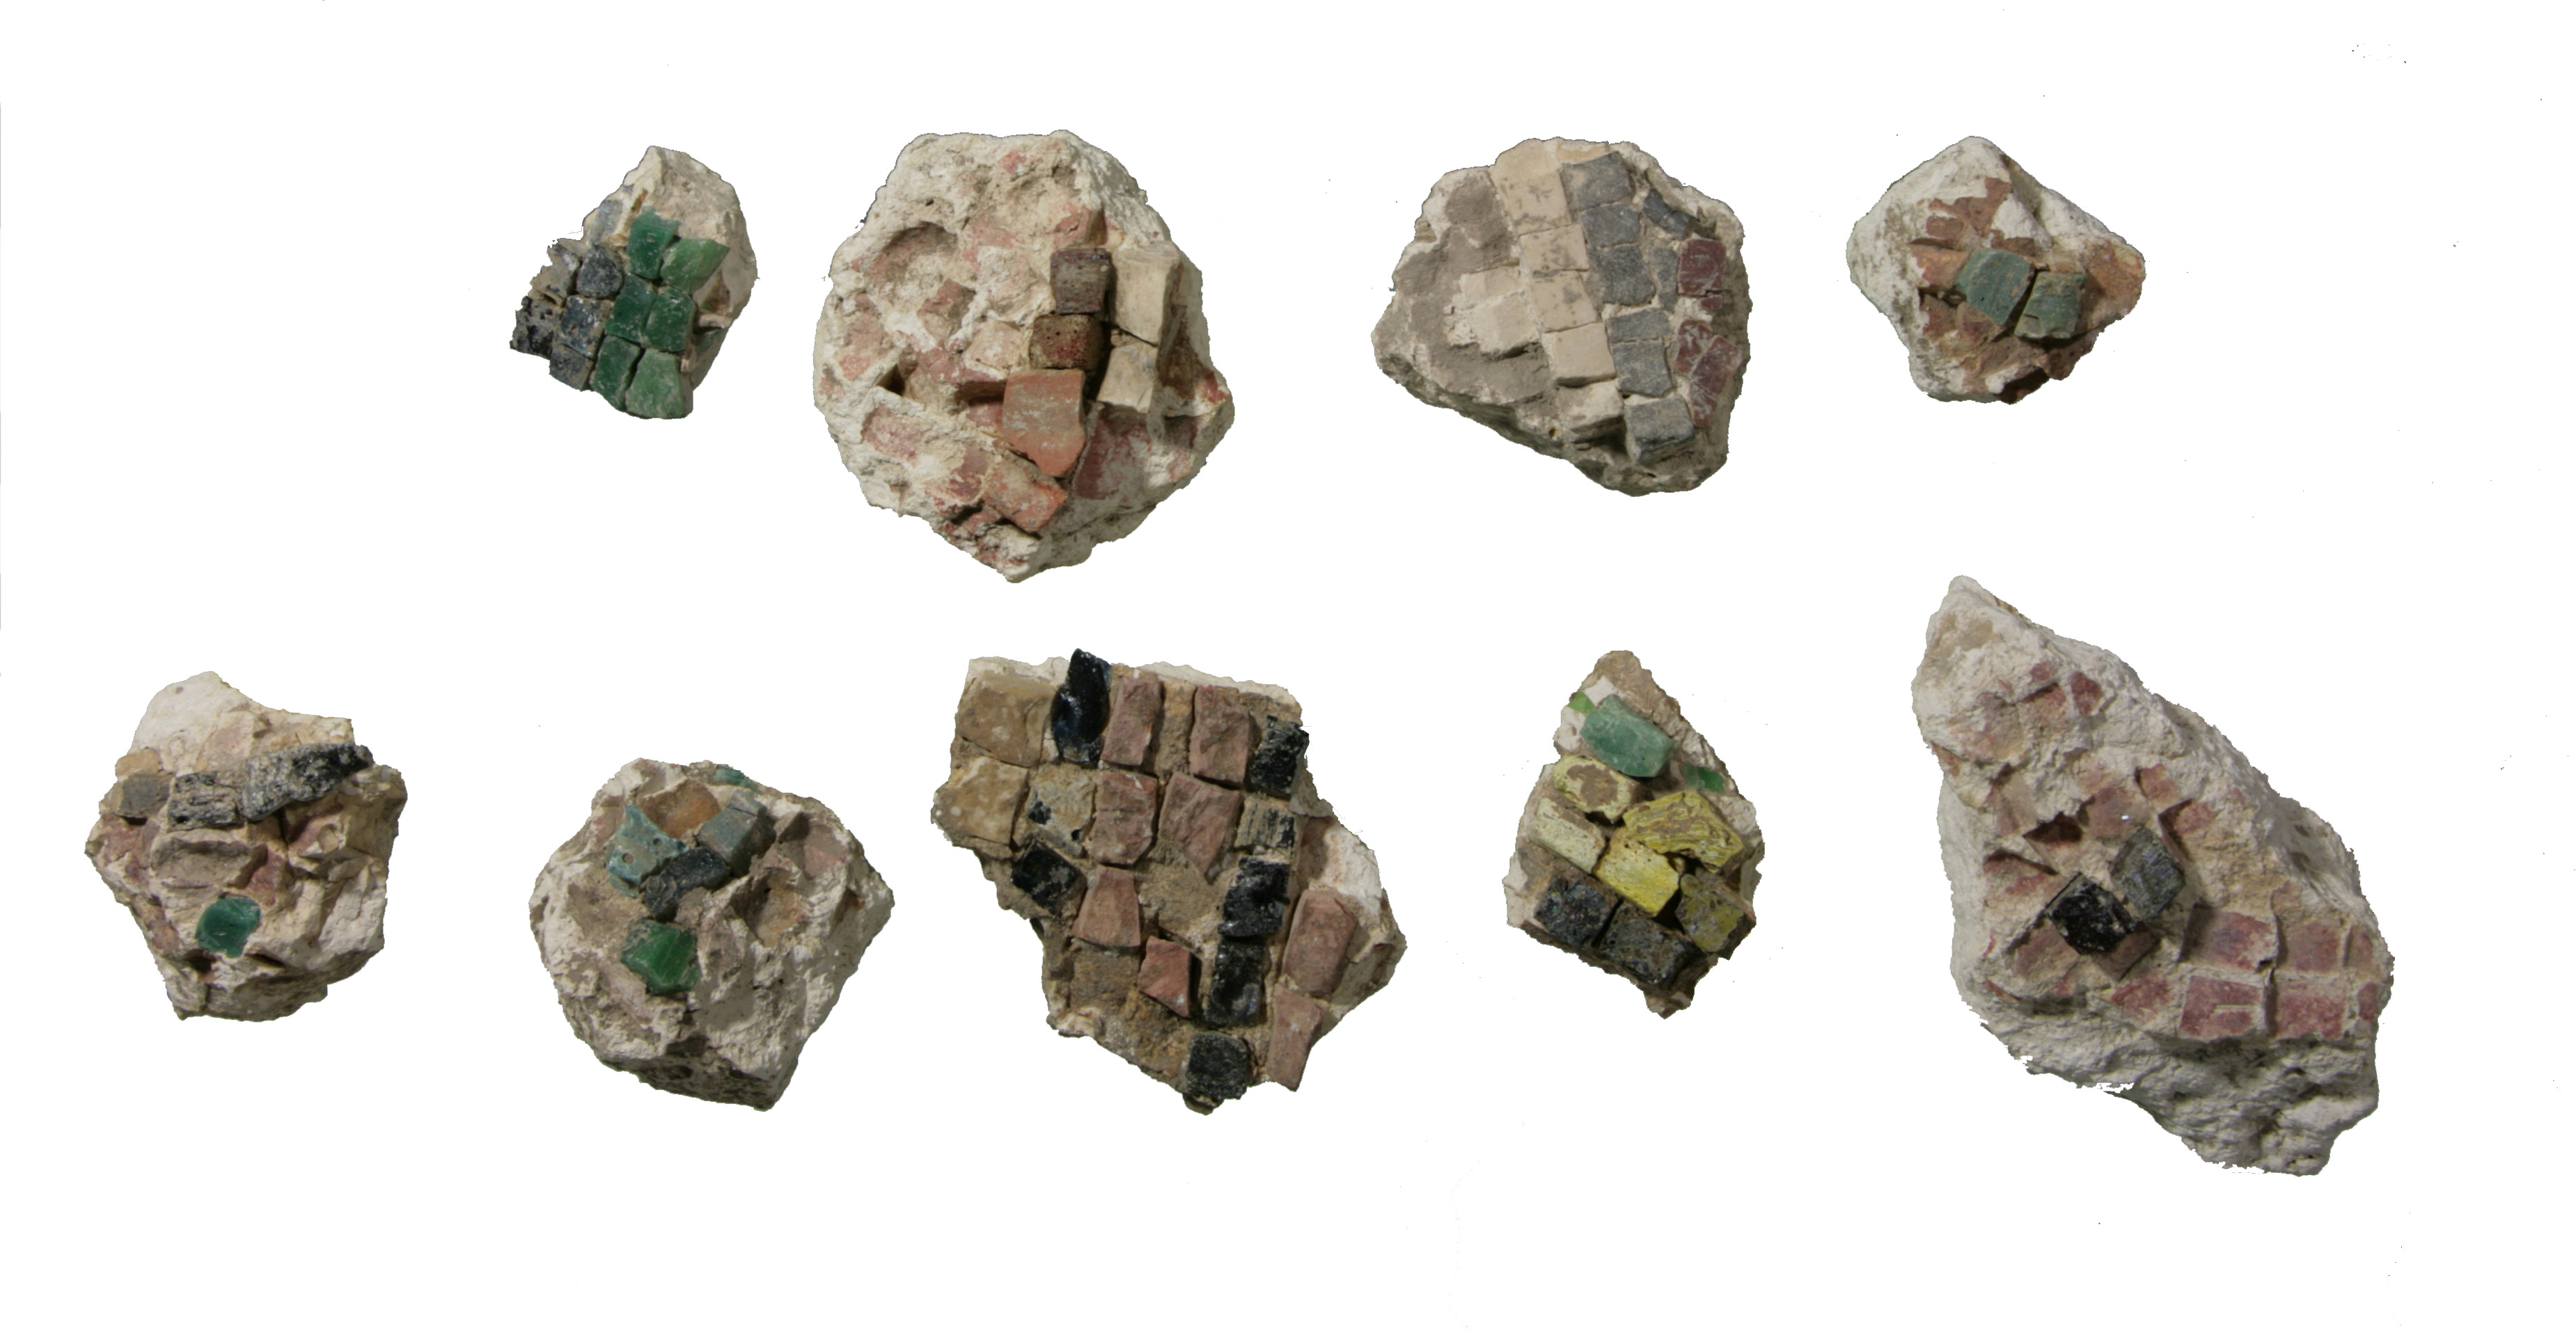 A few examples of the many sections of Mosaic floors which were found at the Temple Mount Sifting Site